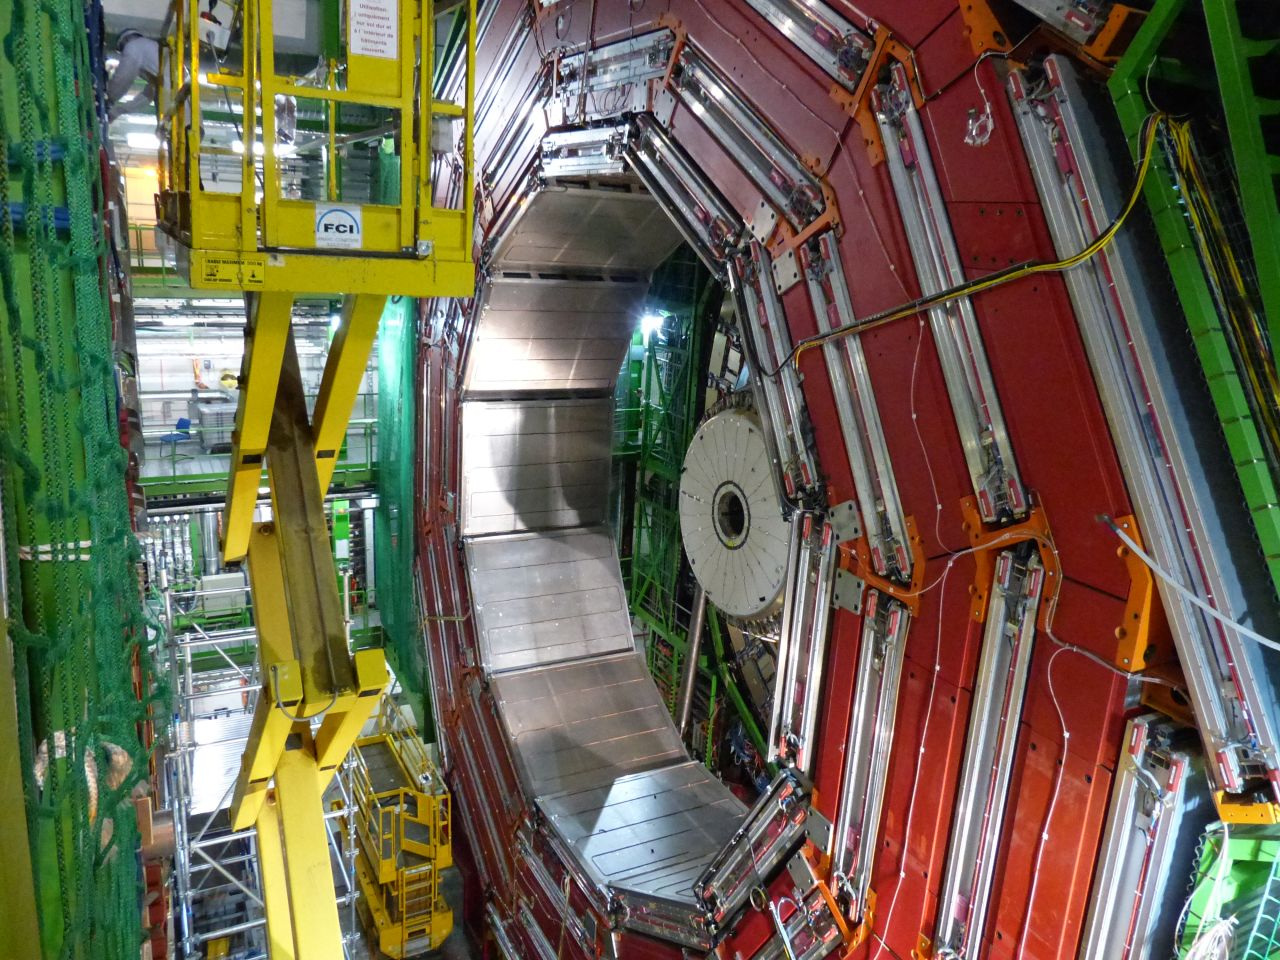 The Higgs boson, the elusive particle that scientists had hoped to find for decades, was detected by two general-purpose experiments at the Large Hadron Collider, as scientists announced in 2012. The Compact Muon Solenoid (CMS) experiment, pictured, is one of them.